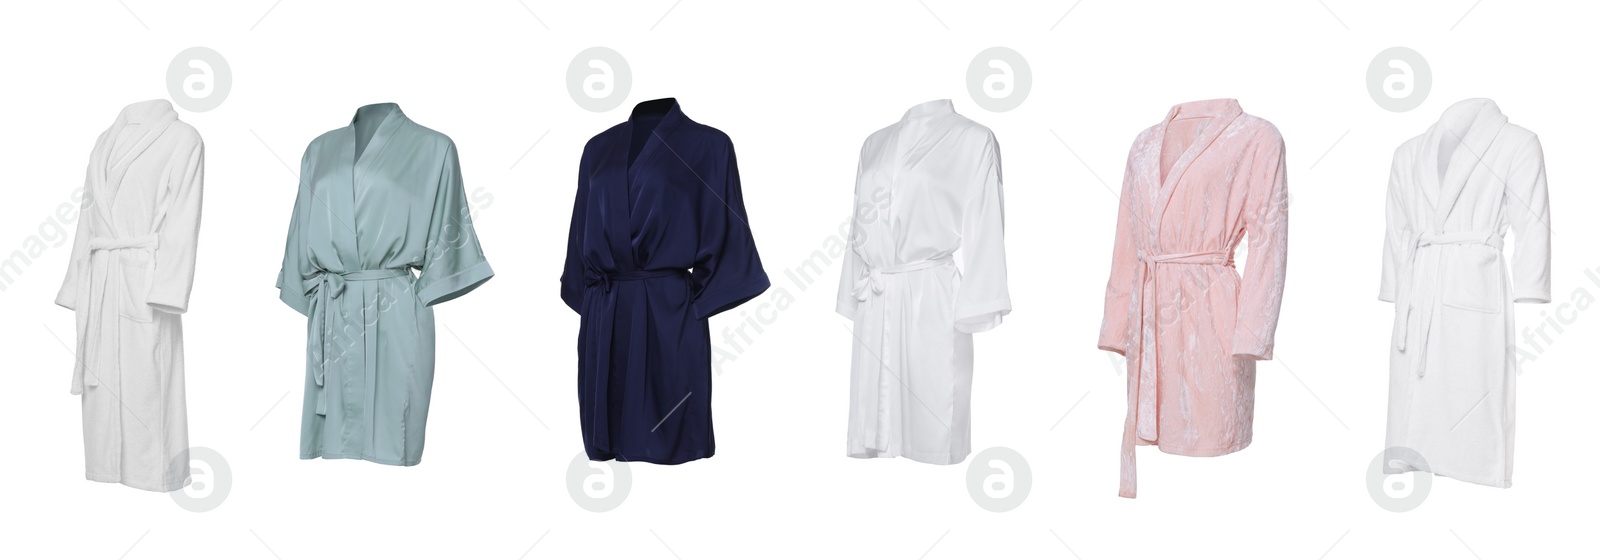 Image of Set of different bathrobes on white background